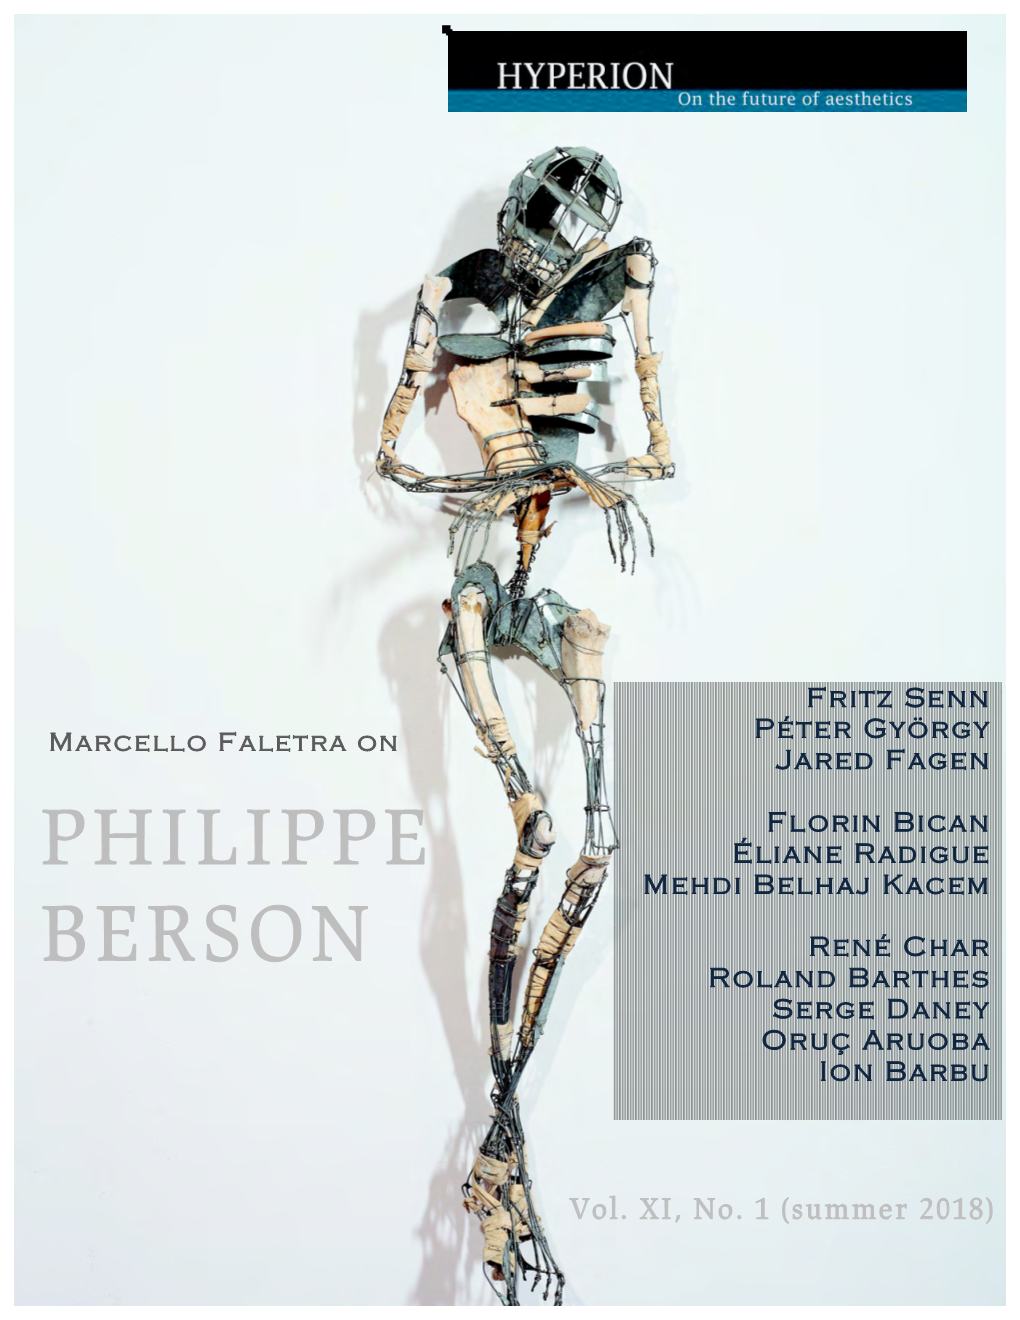 Philippe Berson’S Dance of Death: the Repressed of Beauty